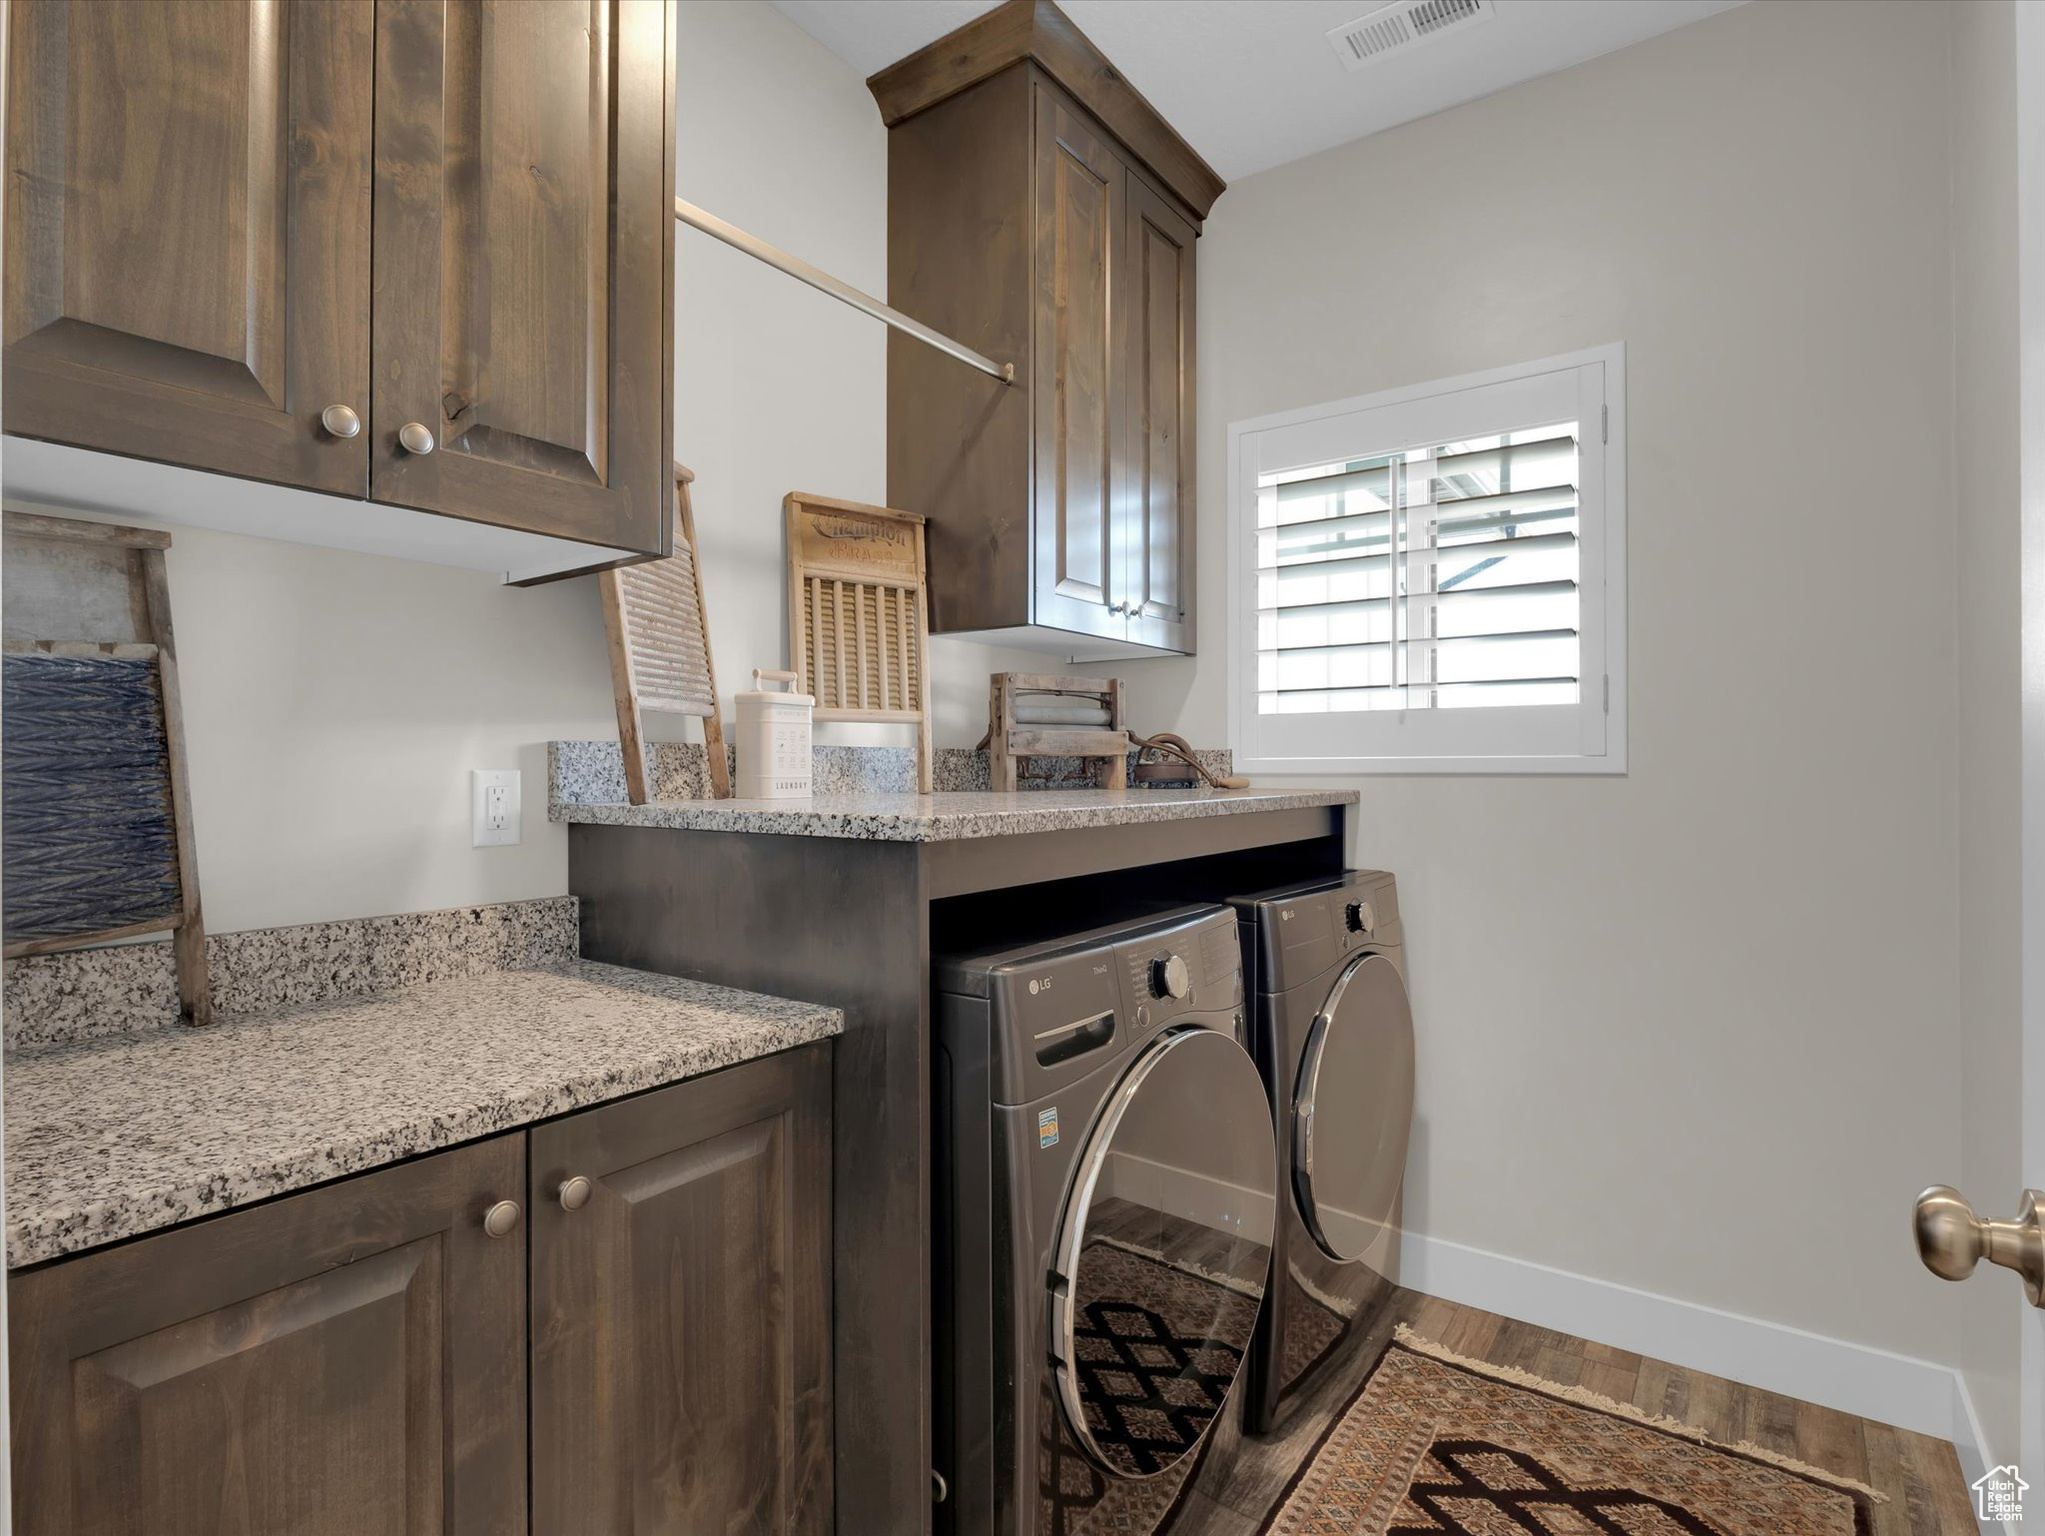 Laundry room featuring hardwood / wood-style floors, granite counter tops and cabinets